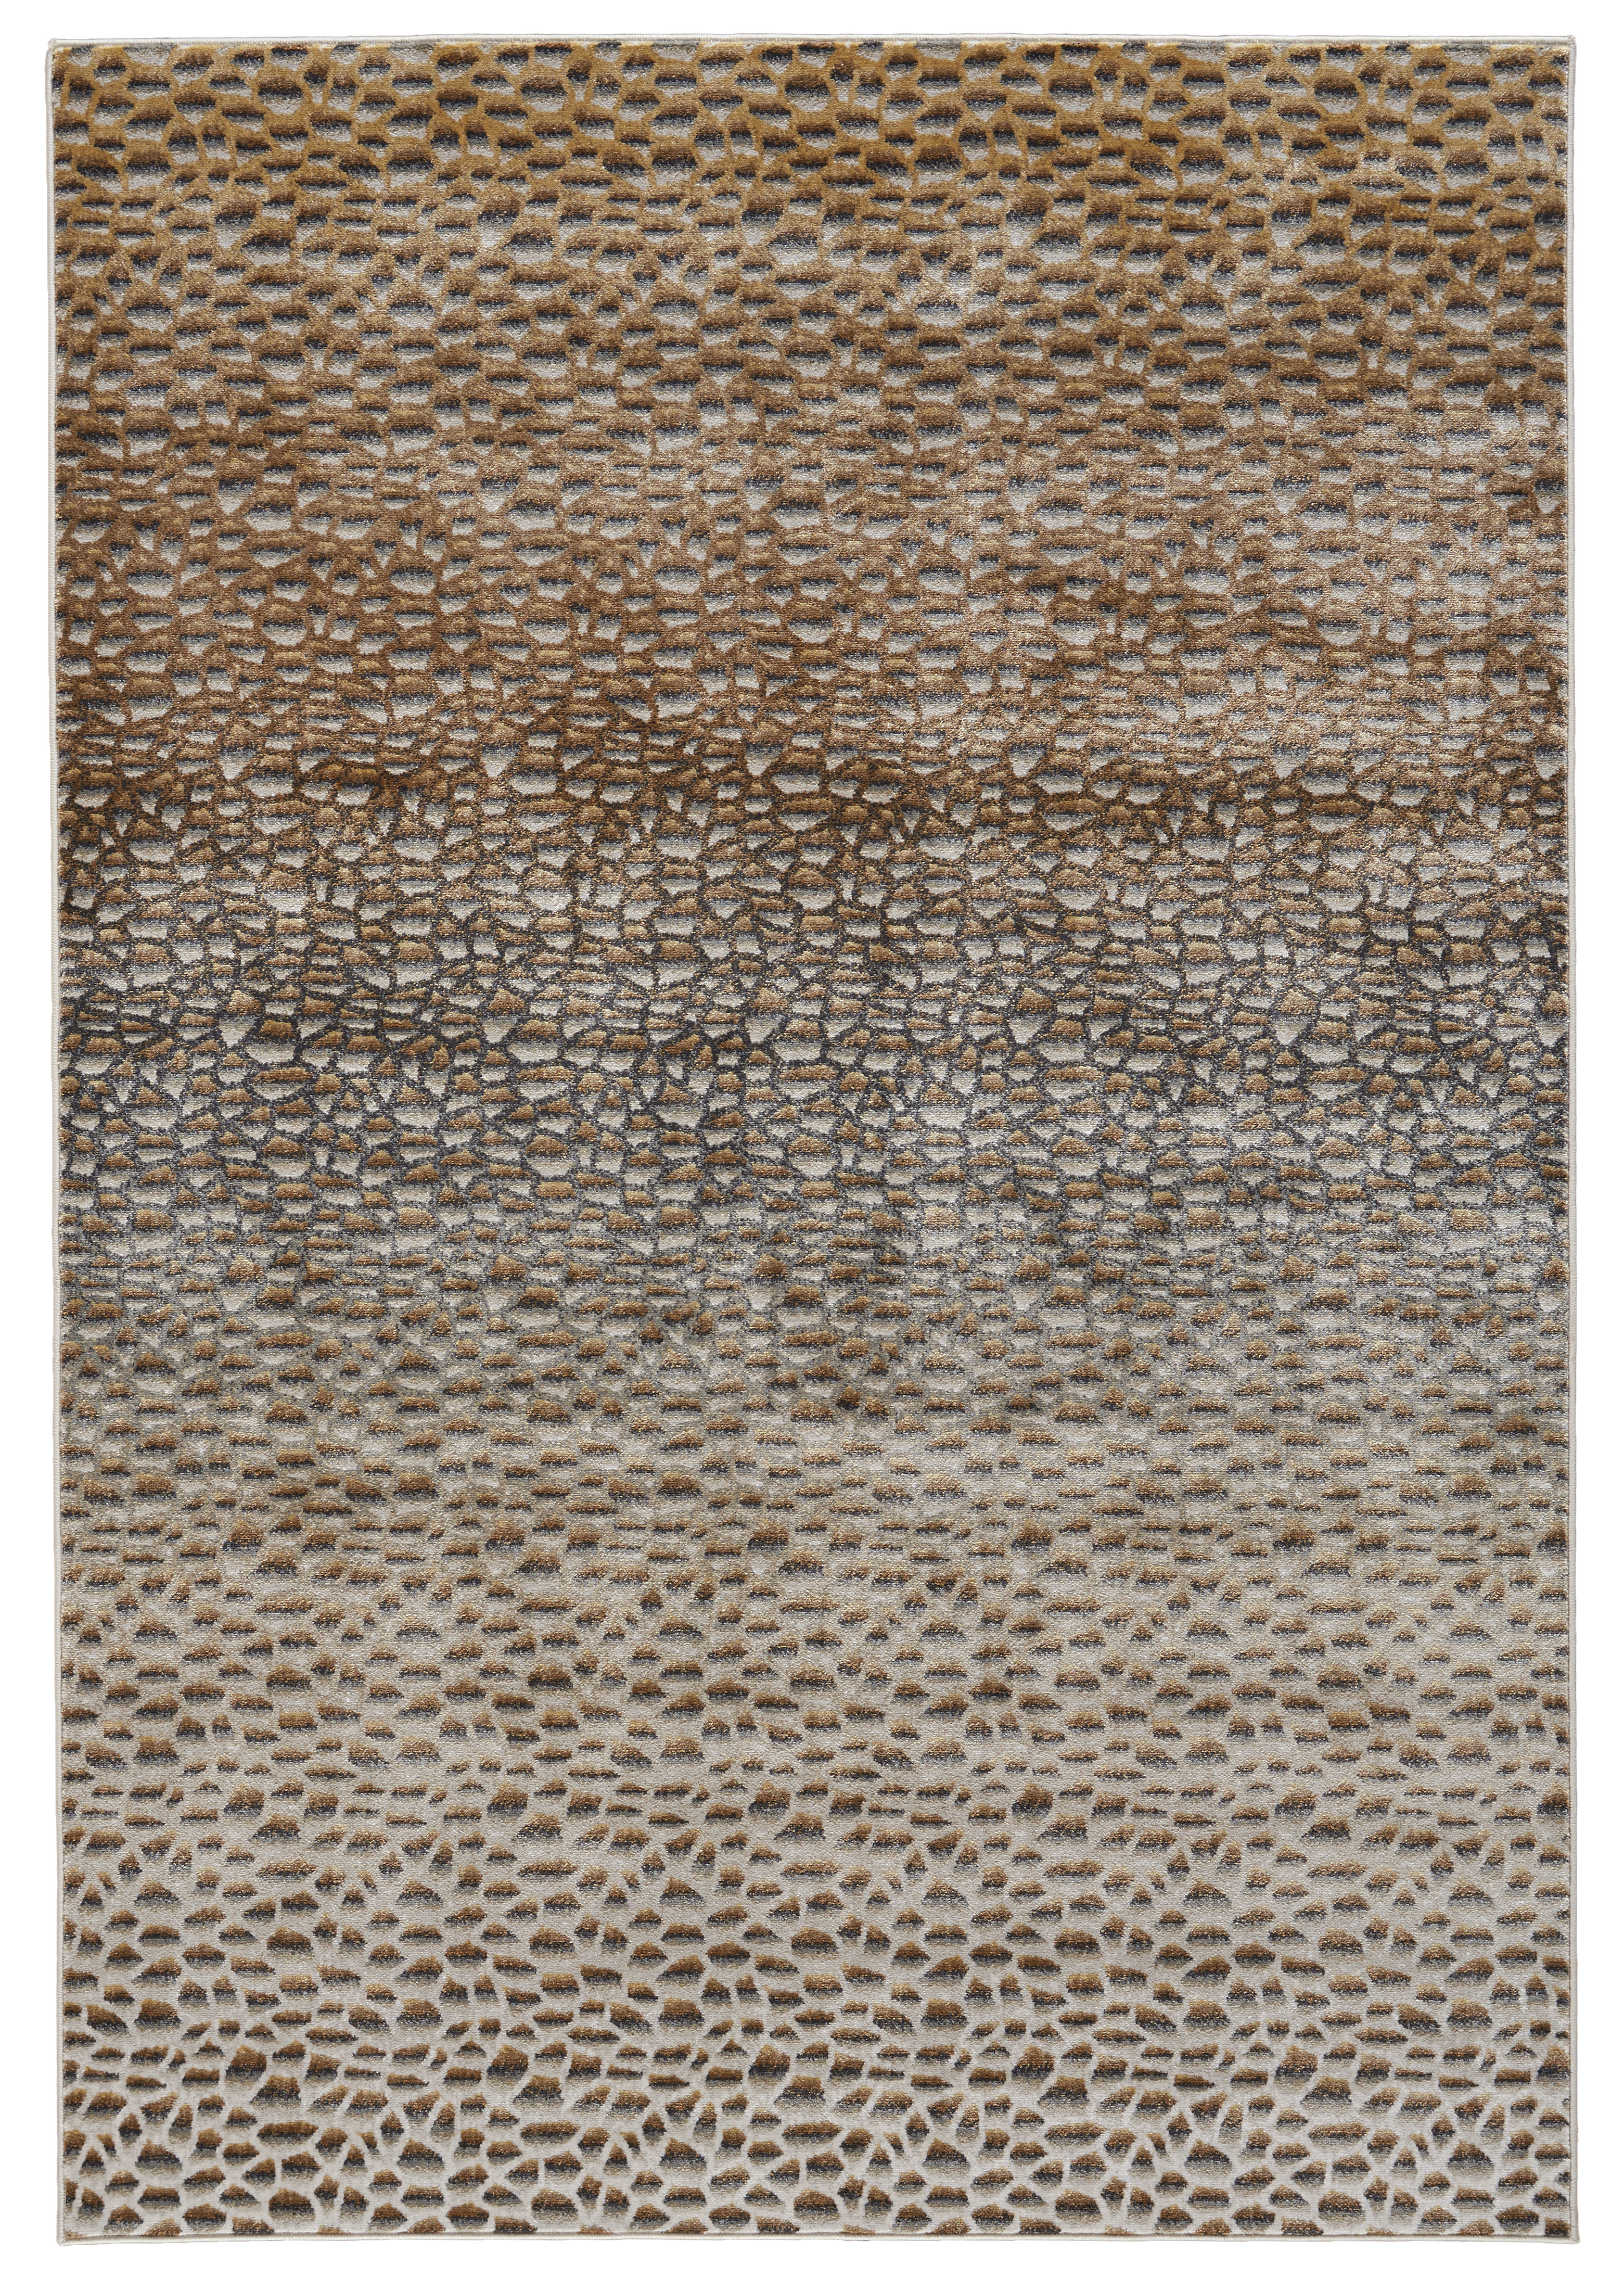 Cannes area rug in metallic Dark Gold from Feizy